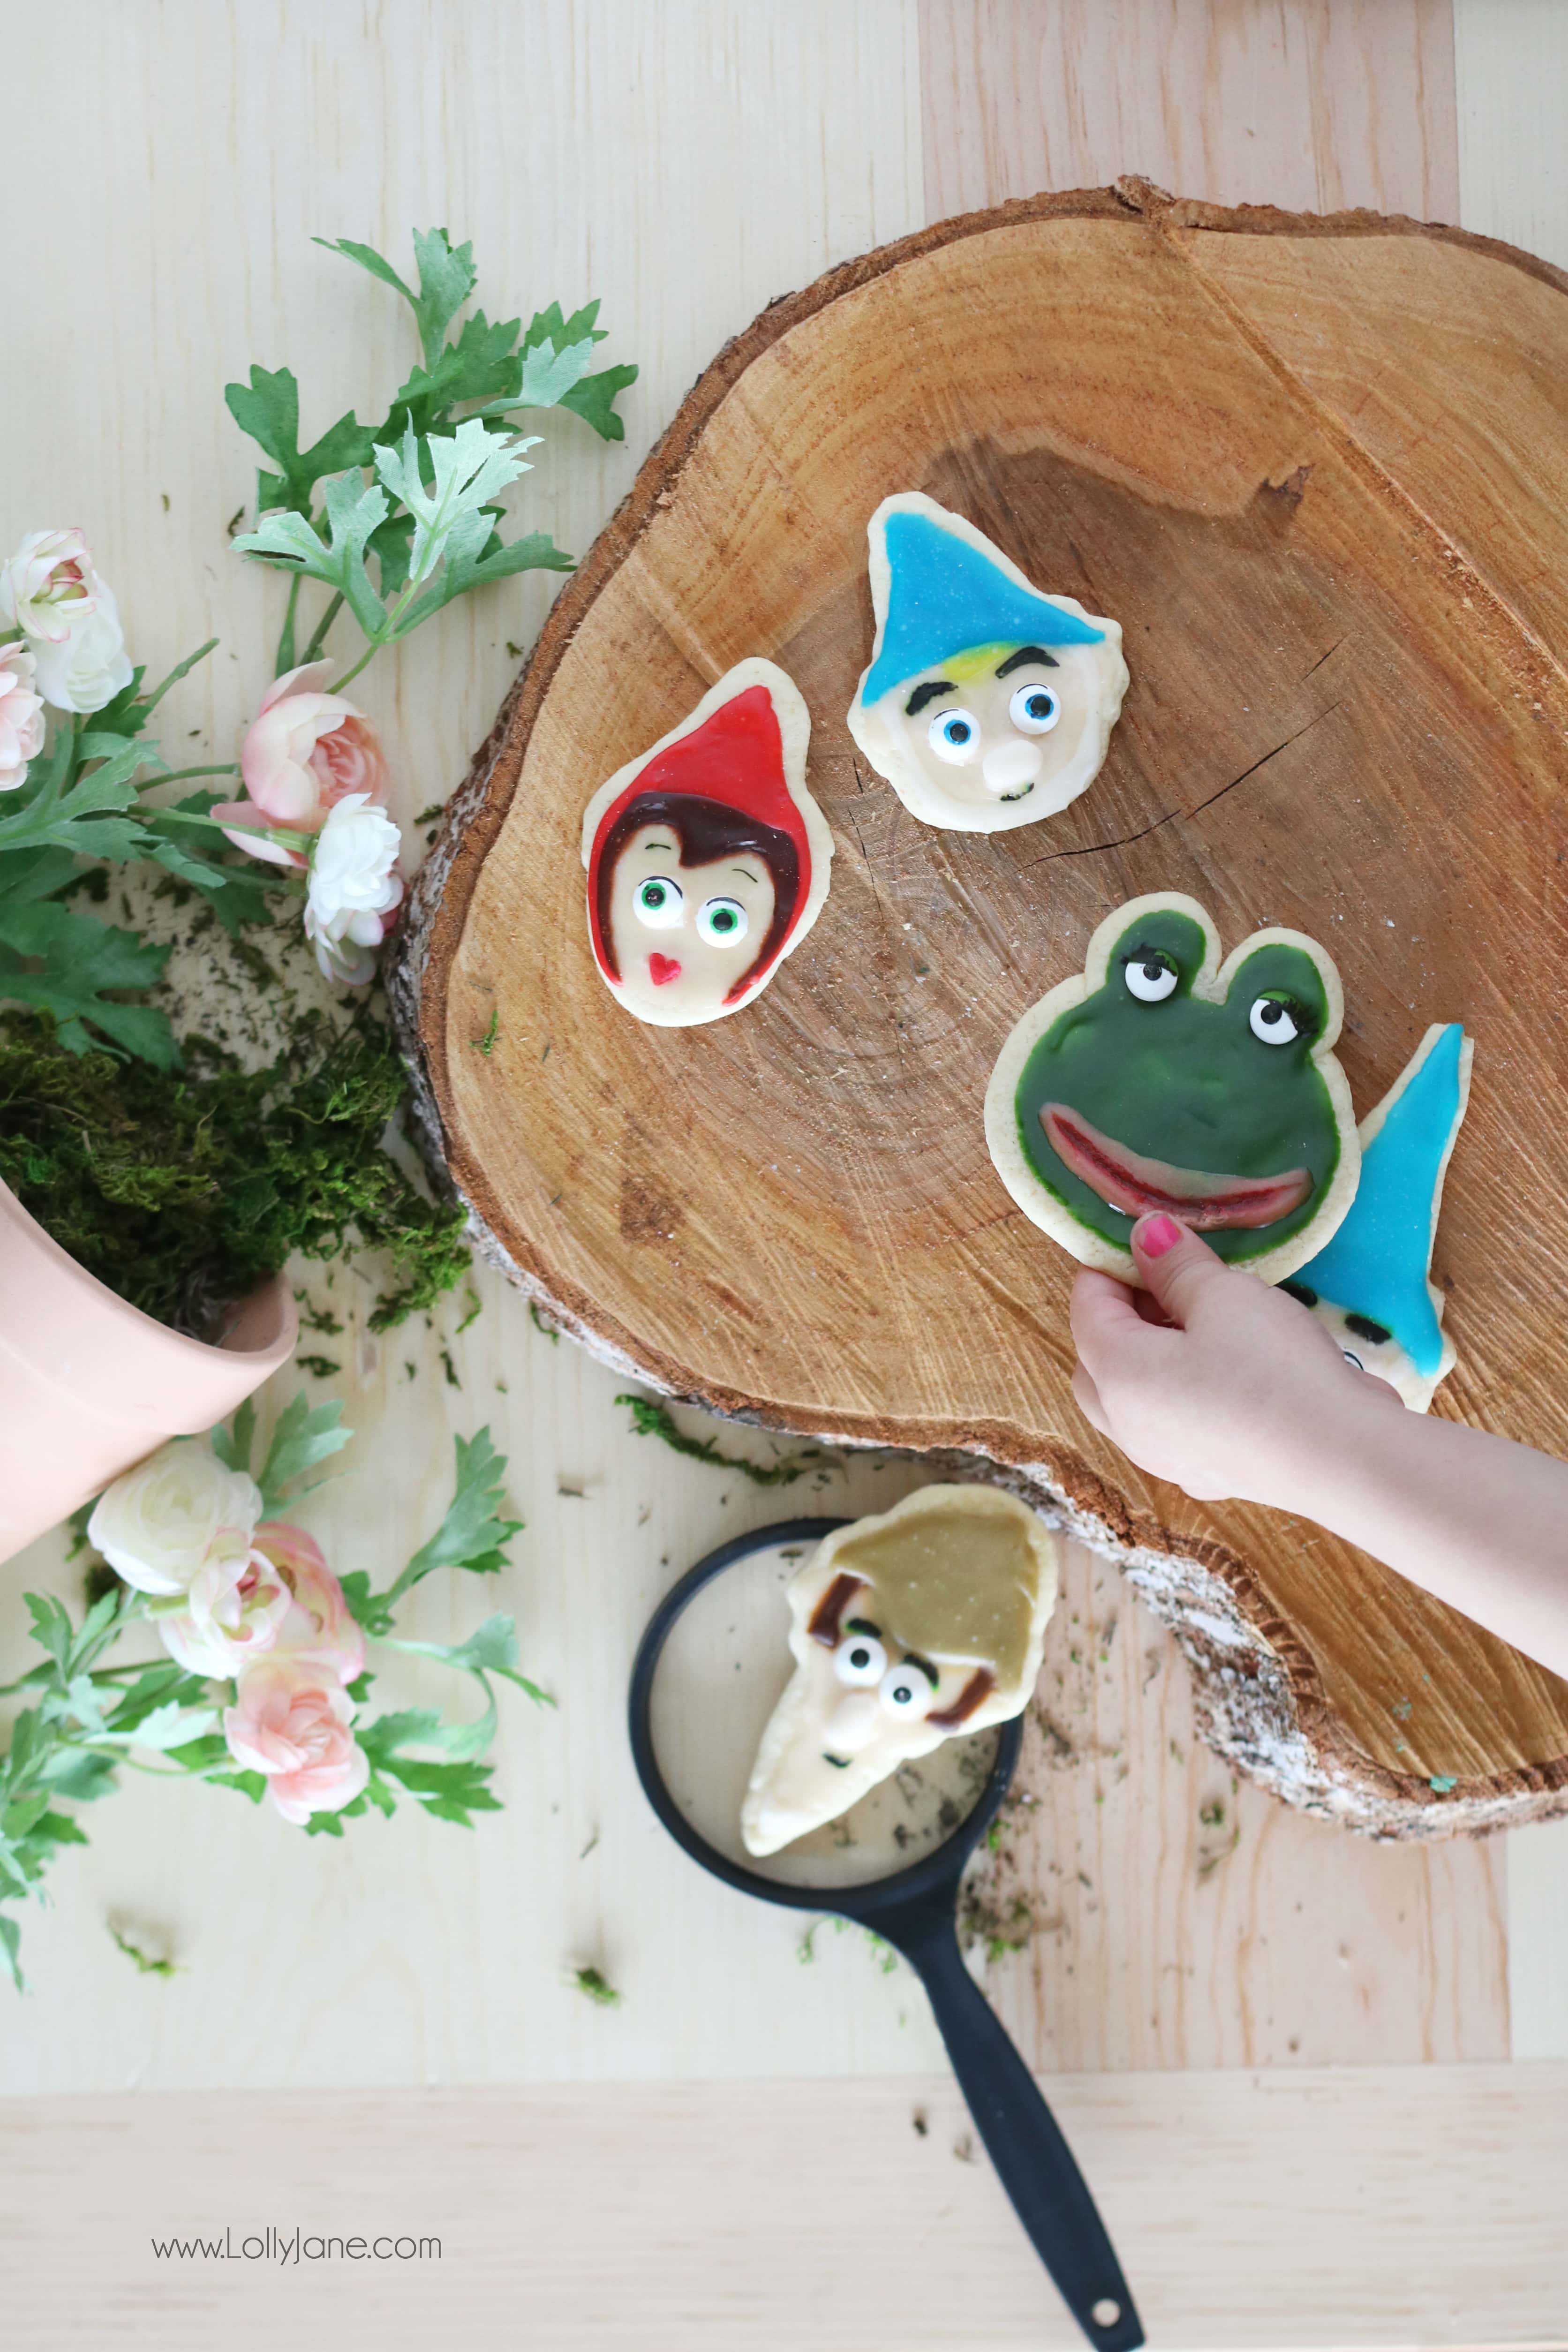 Try these easy and cute Sherlock Gnomes sugar cookies, so cute and yummy!